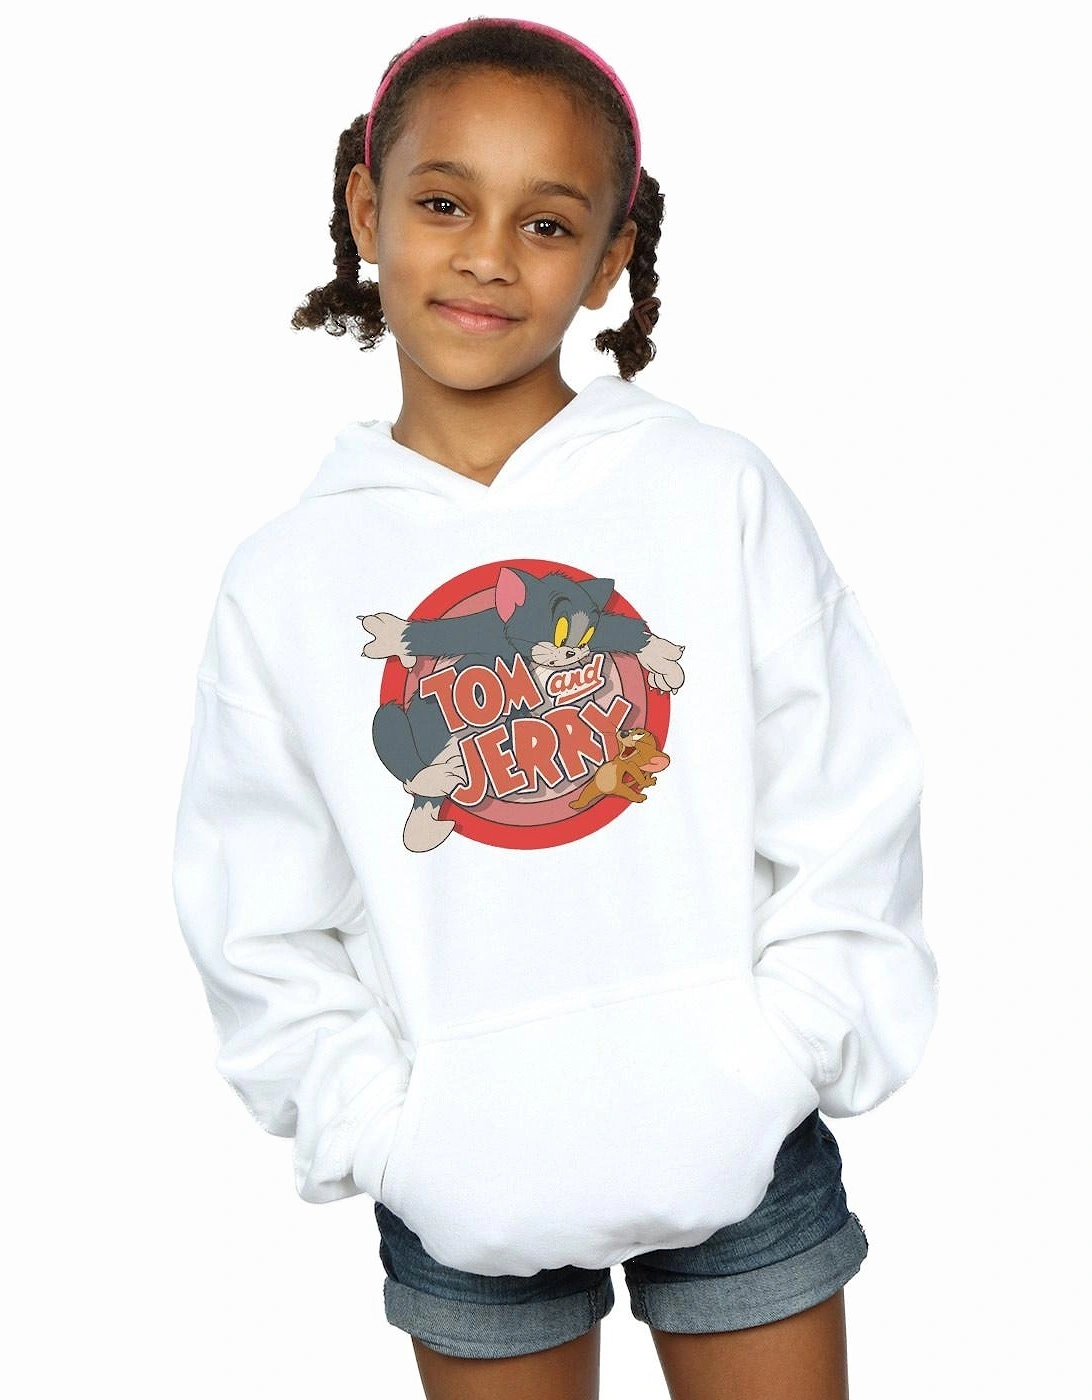 Tom And Jerry Girls Classic Catch Hoodie